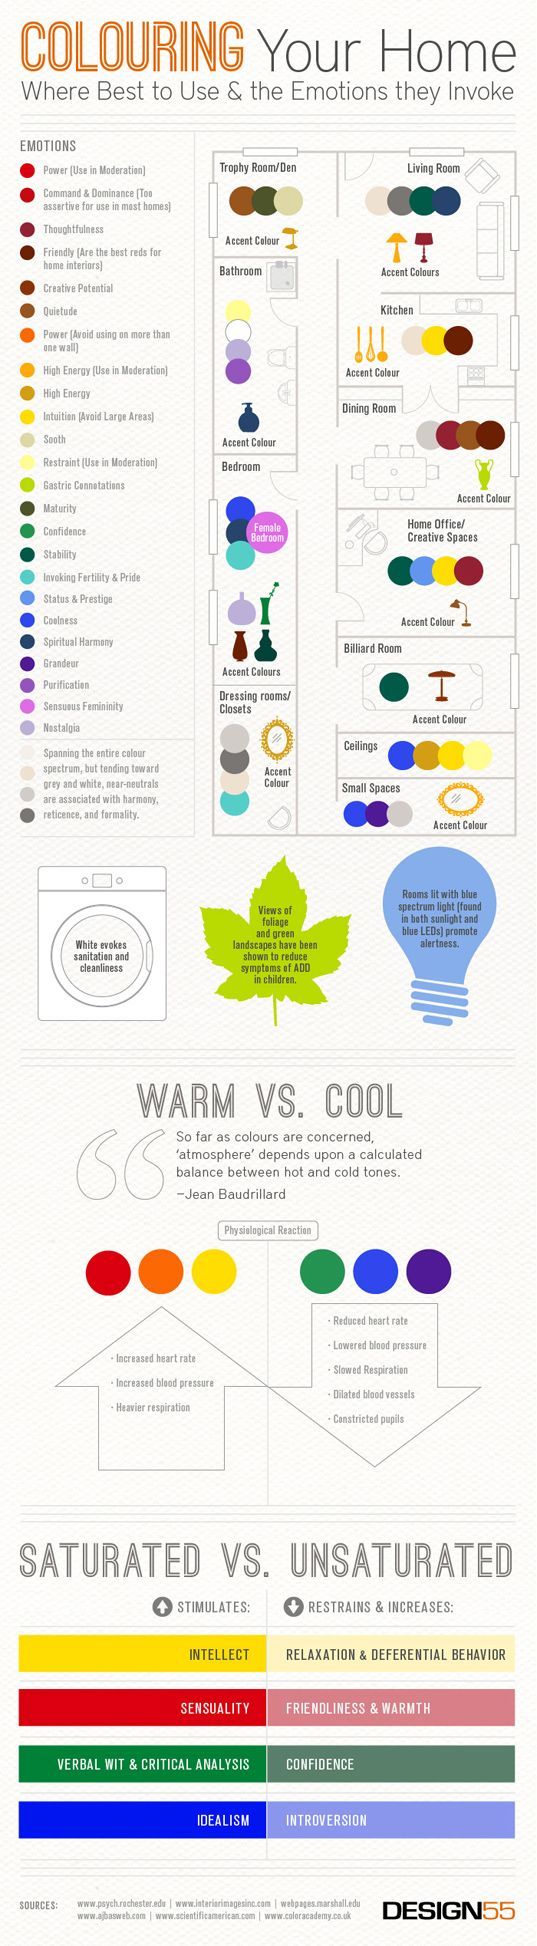 coloring your home, infographic, green design, sustainable design, green interiors, interior decor, interior design, interior